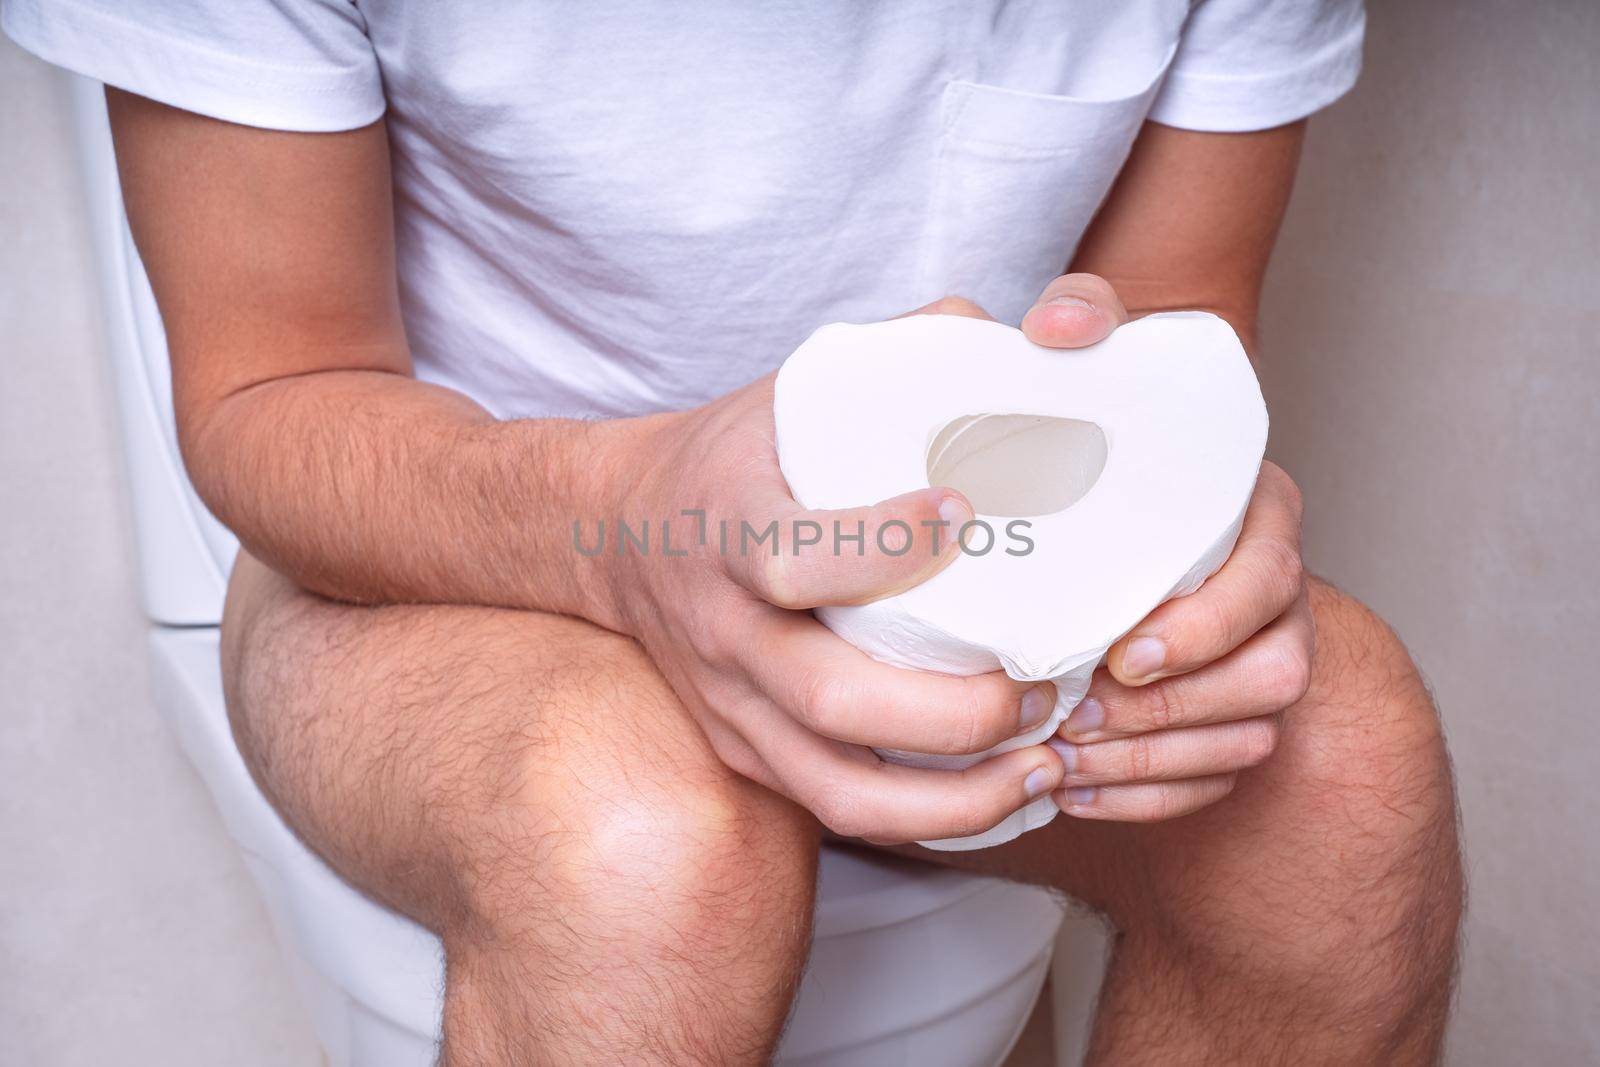 Man sitting on the toilet with toilet paper and suffering from constipation, diarrhea, stomach ache or cramps. High quality photo